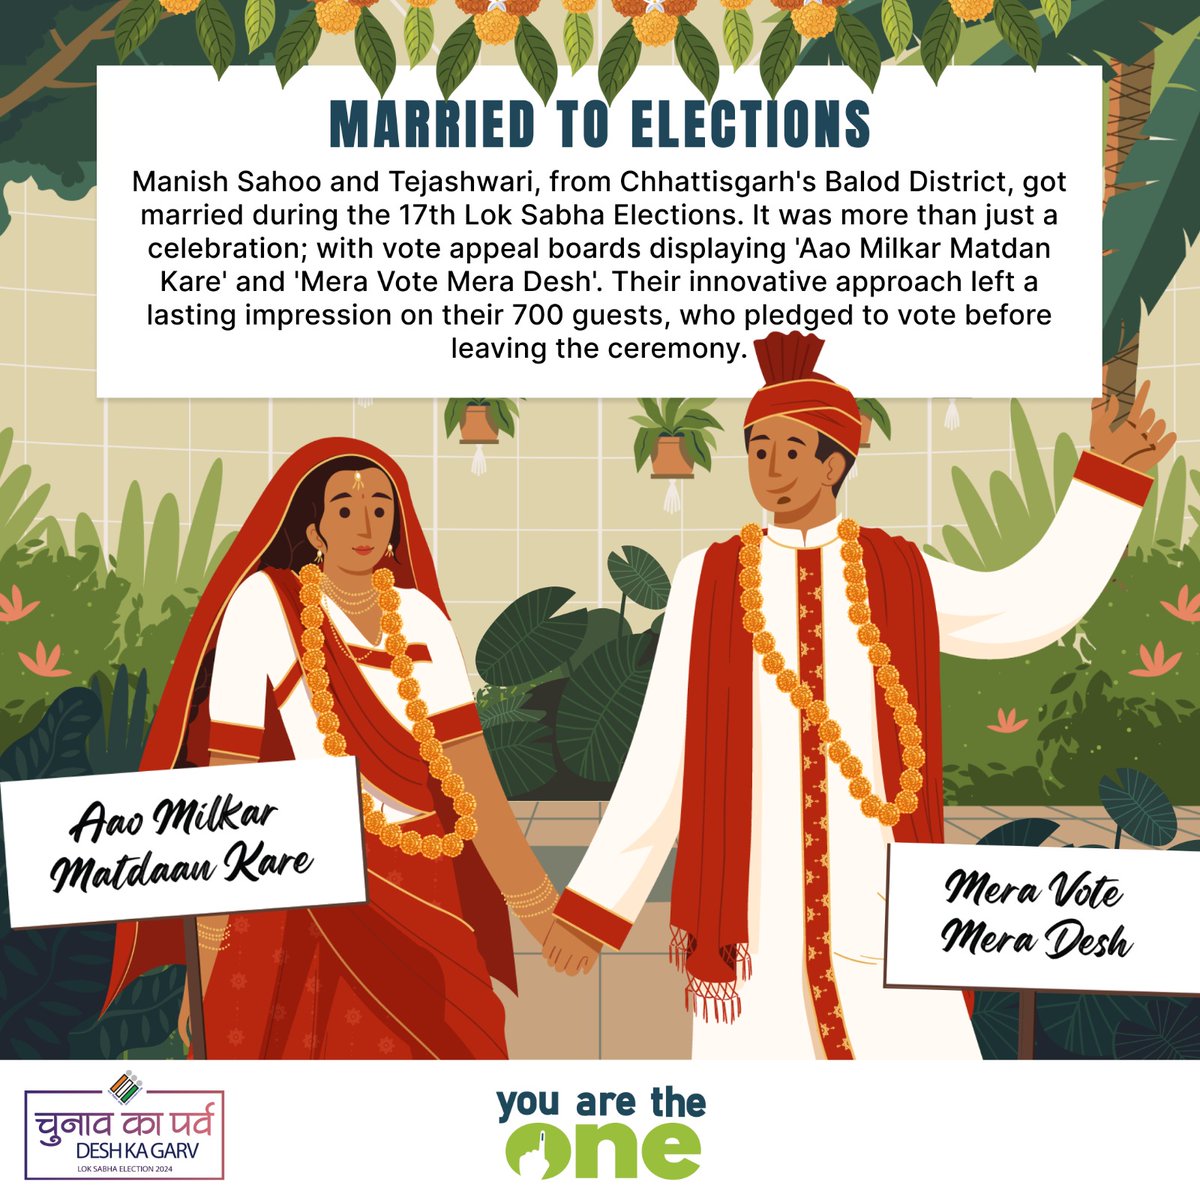 Love, vows, and voting! ✨ Manish and Tejashwari's wedding was more than a celebration – it was a call to action for democracy. With 'Aao Milkar Matdan Kare' echoing through the ceremony, they inspired their 700 guests to pledge to vote. Source: Belief in the Ballot, volume 2